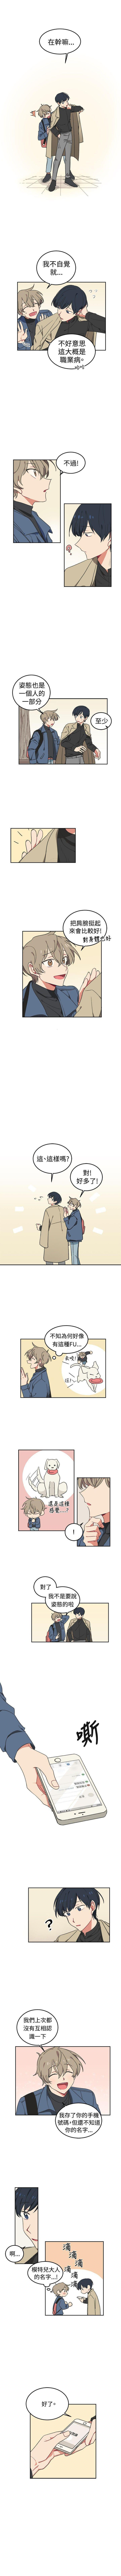 Toying 一不小心掰彎你 1-24 Real - Page 11